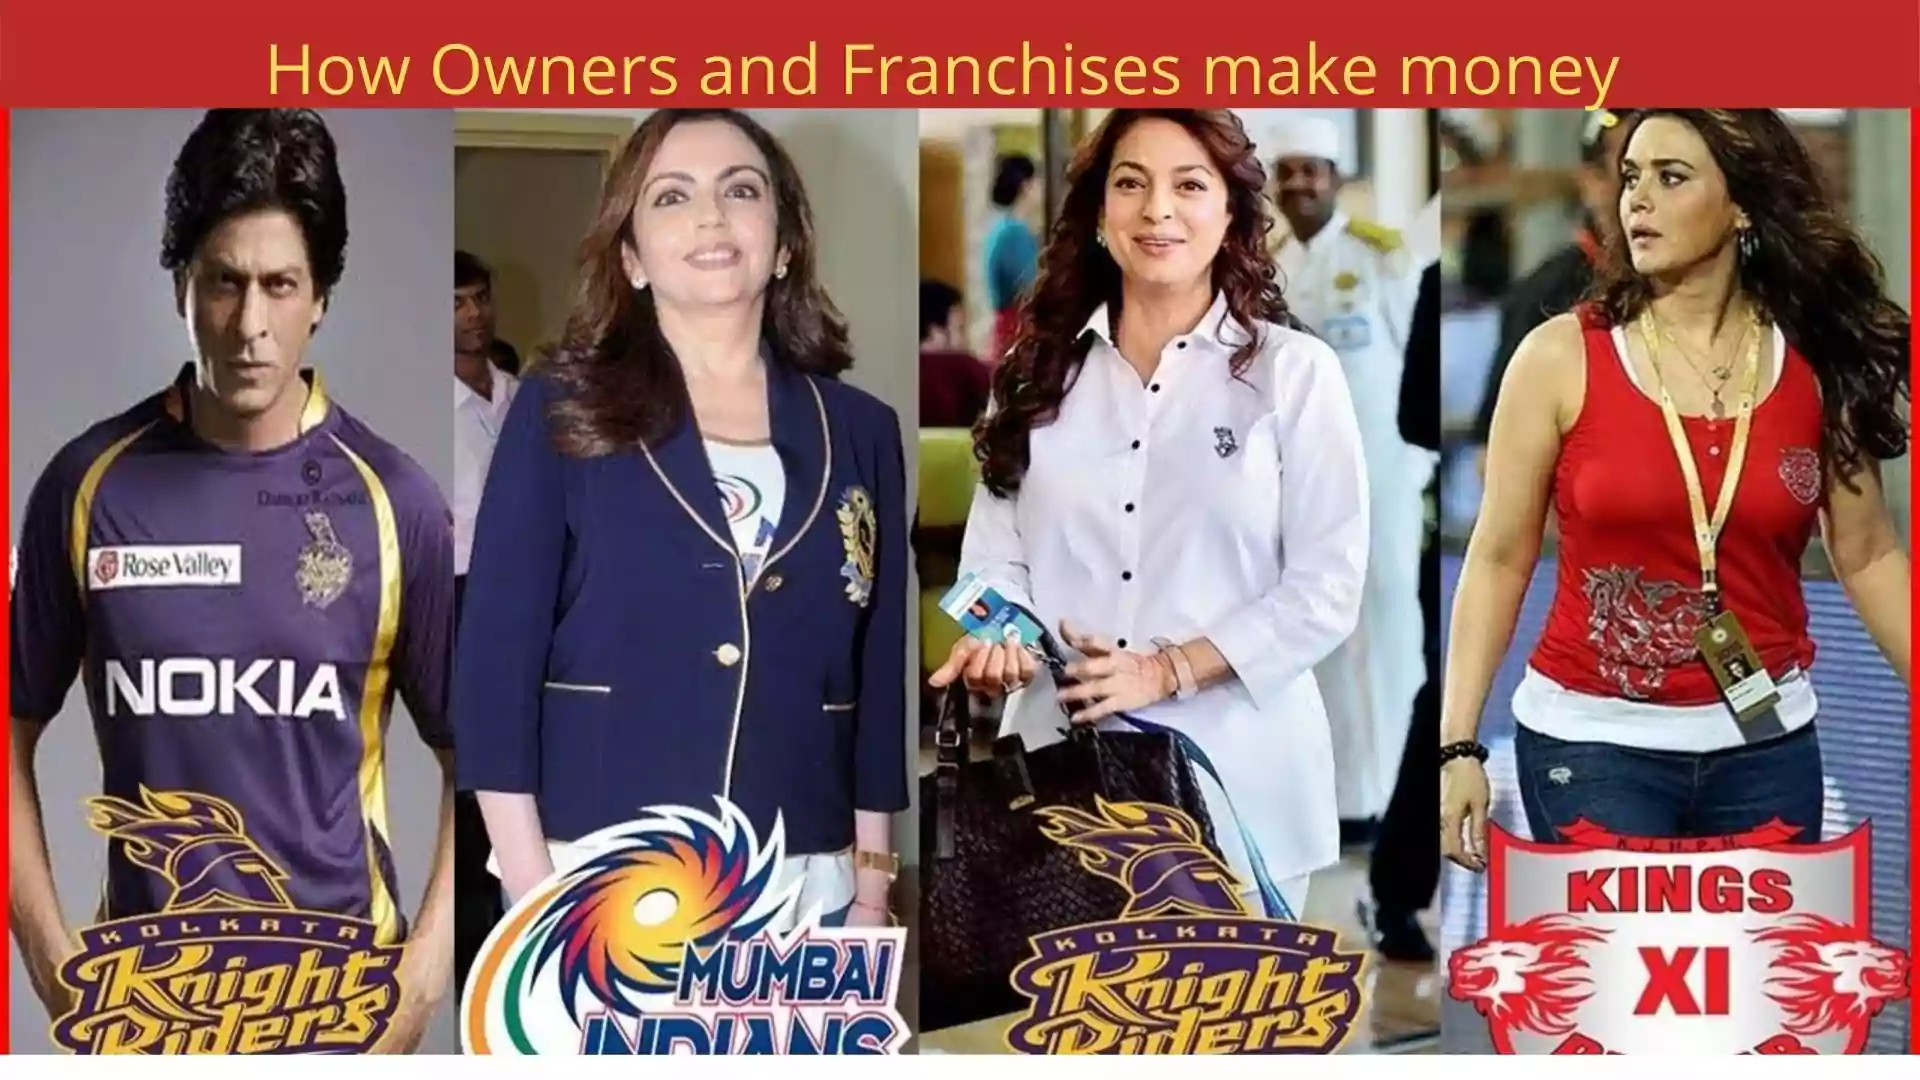 How Owners and Franchises make money